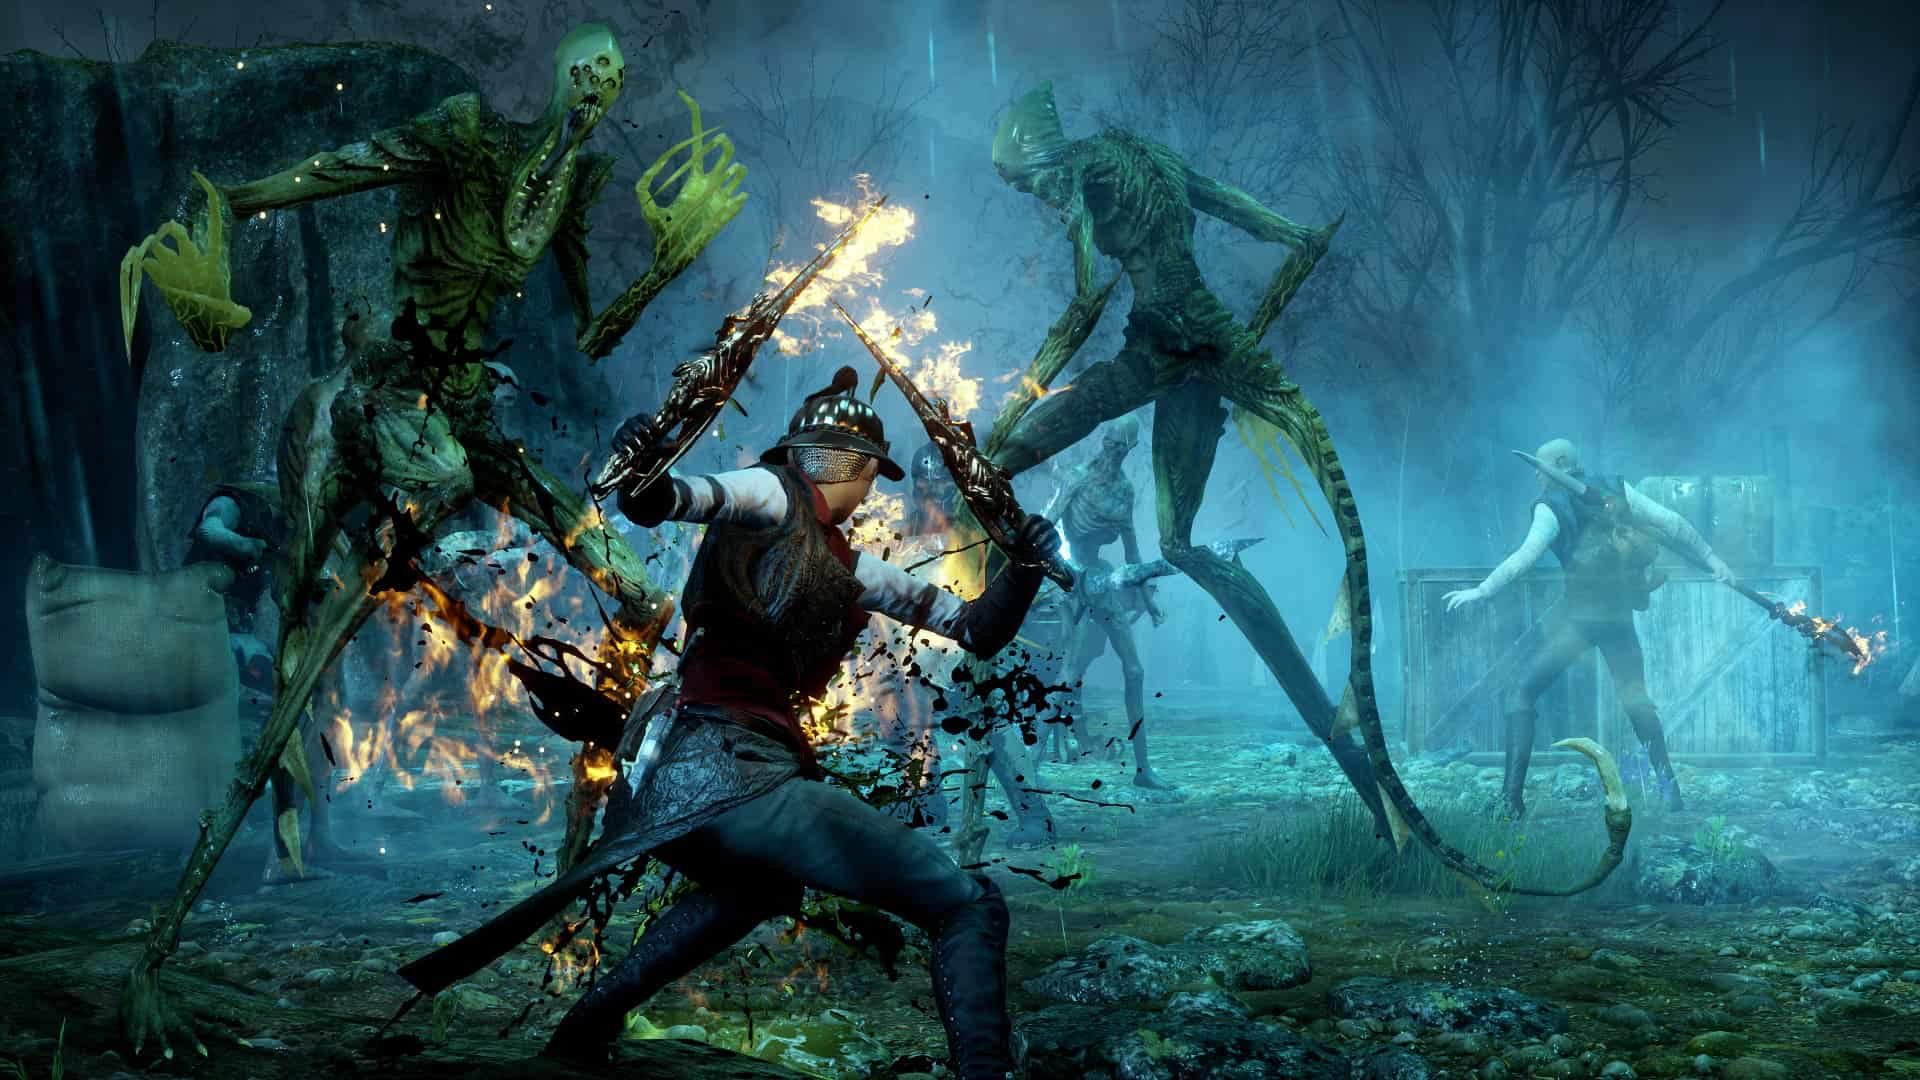 Dragon Age Inquisition console commands and cheats - fighting enemies in the Fade